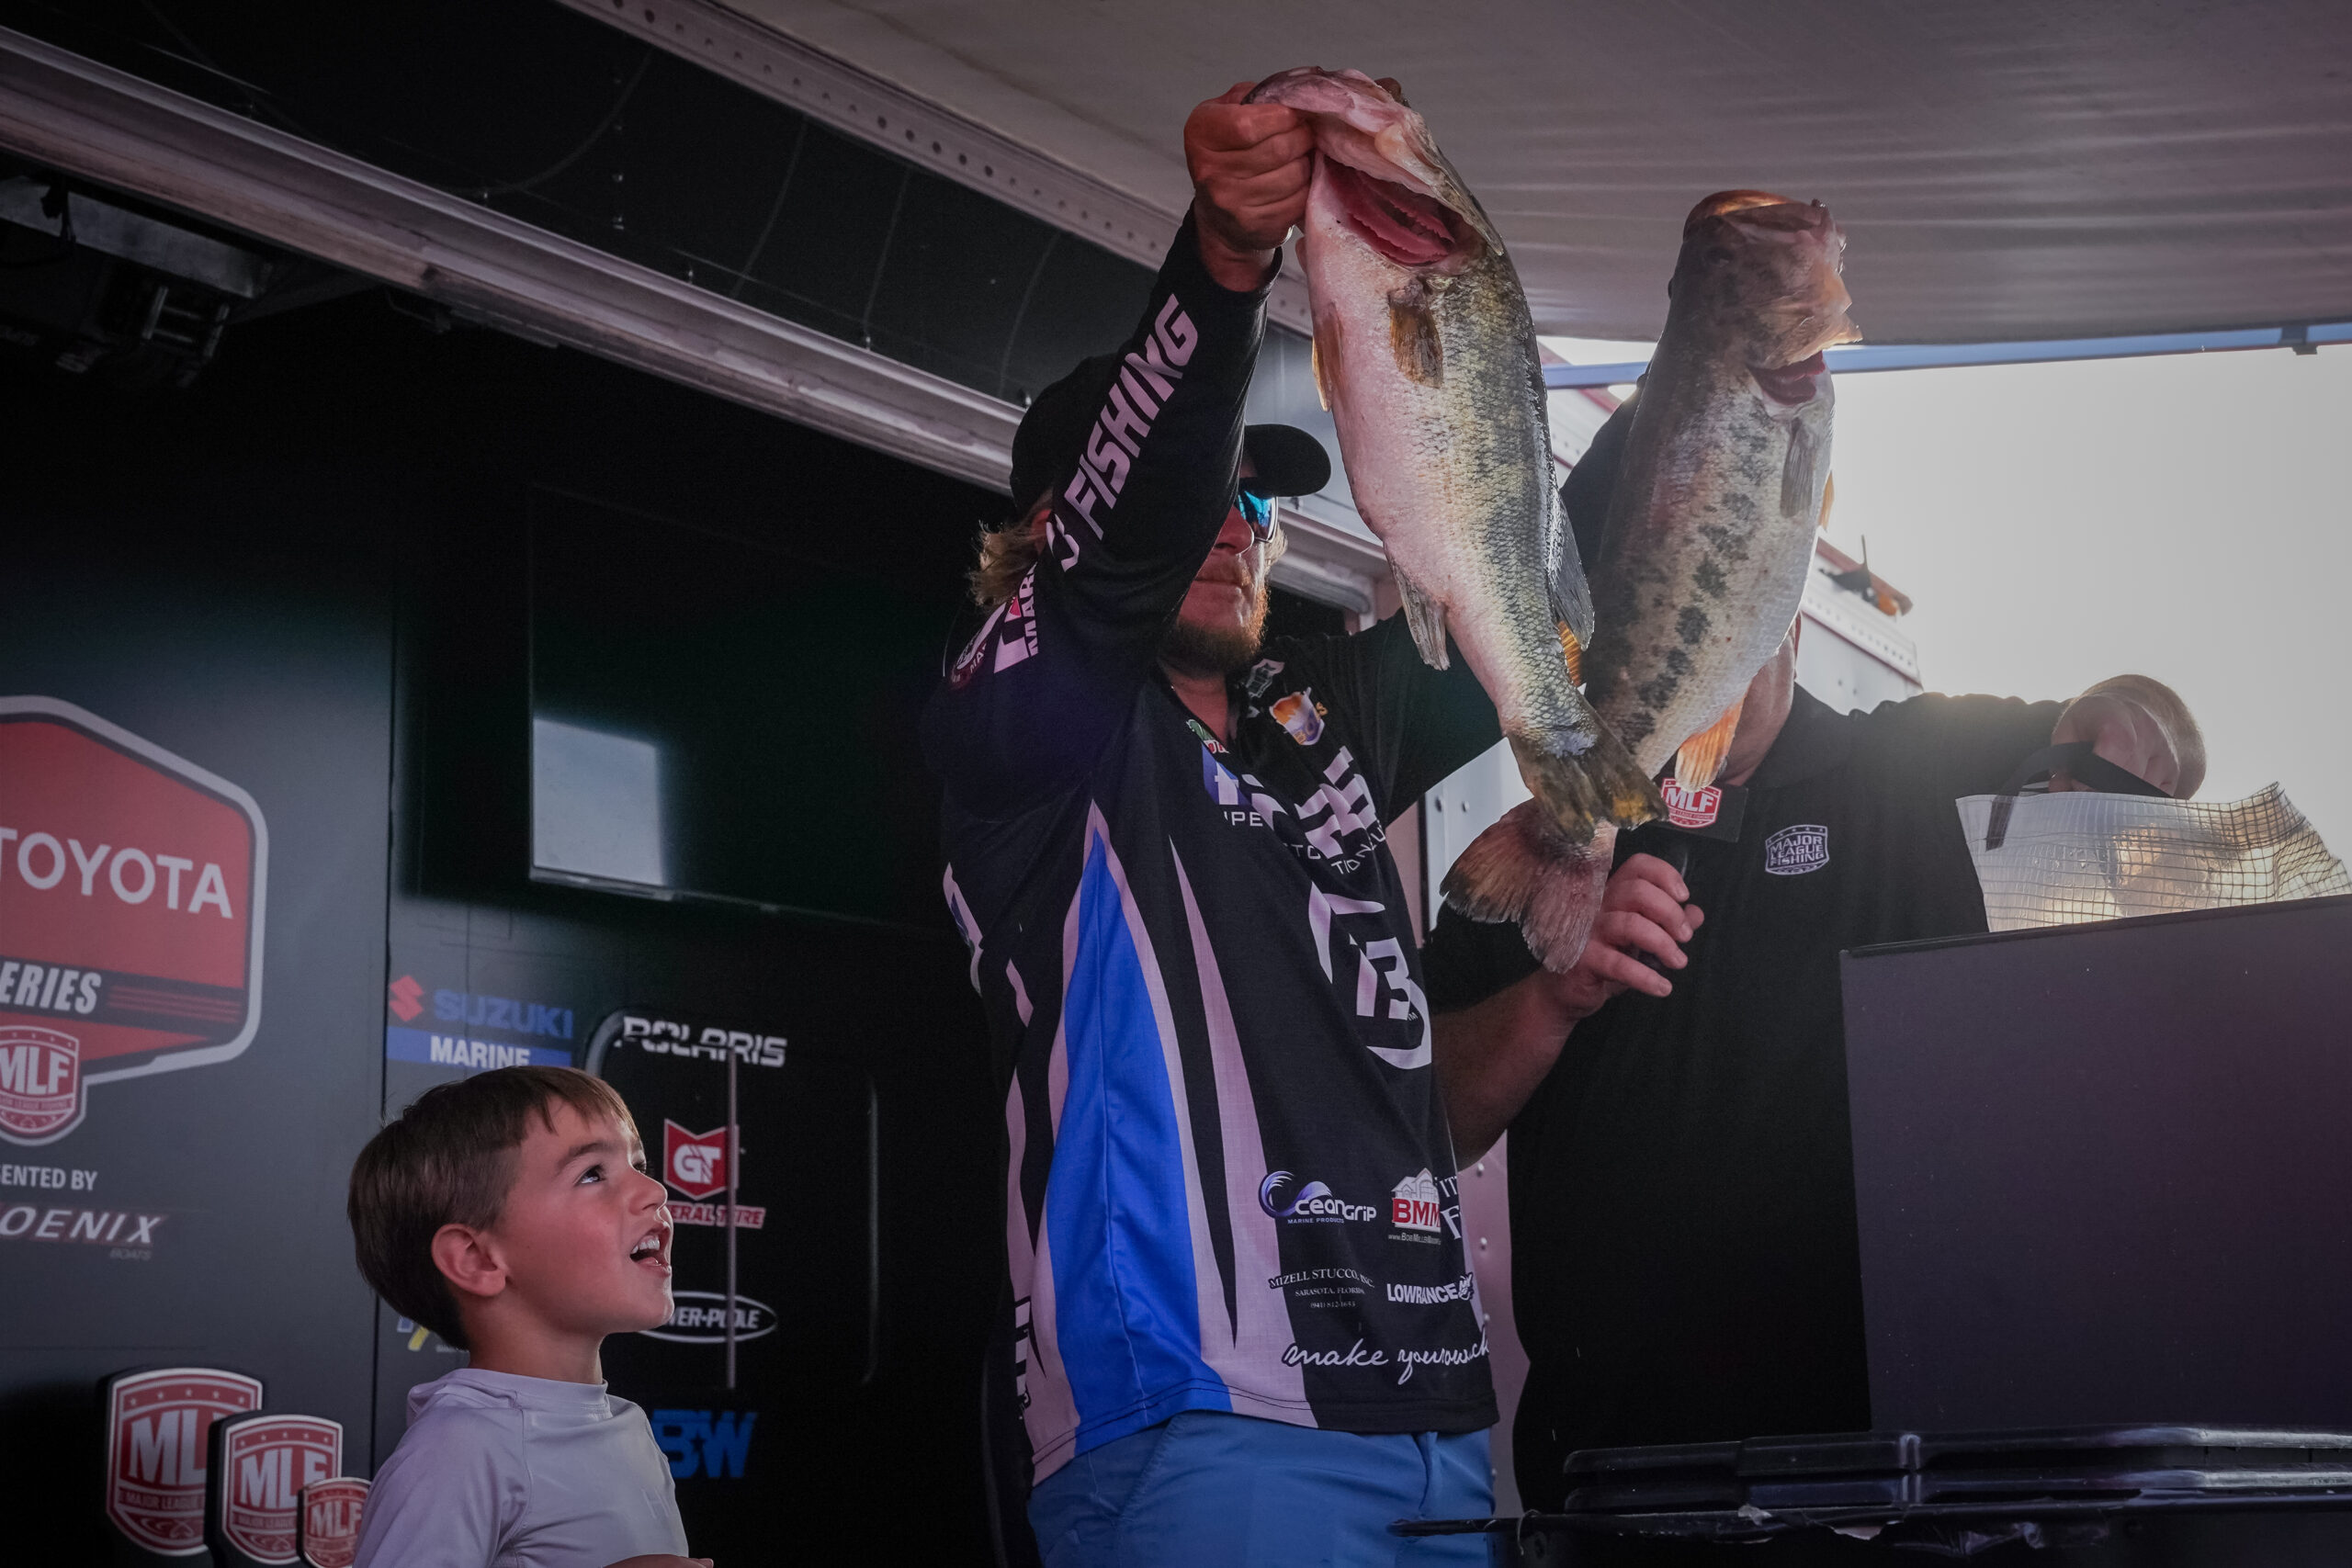 Mizell goes wire-to-wire for second Toyota Series win on the Big O - Major  League Fishing